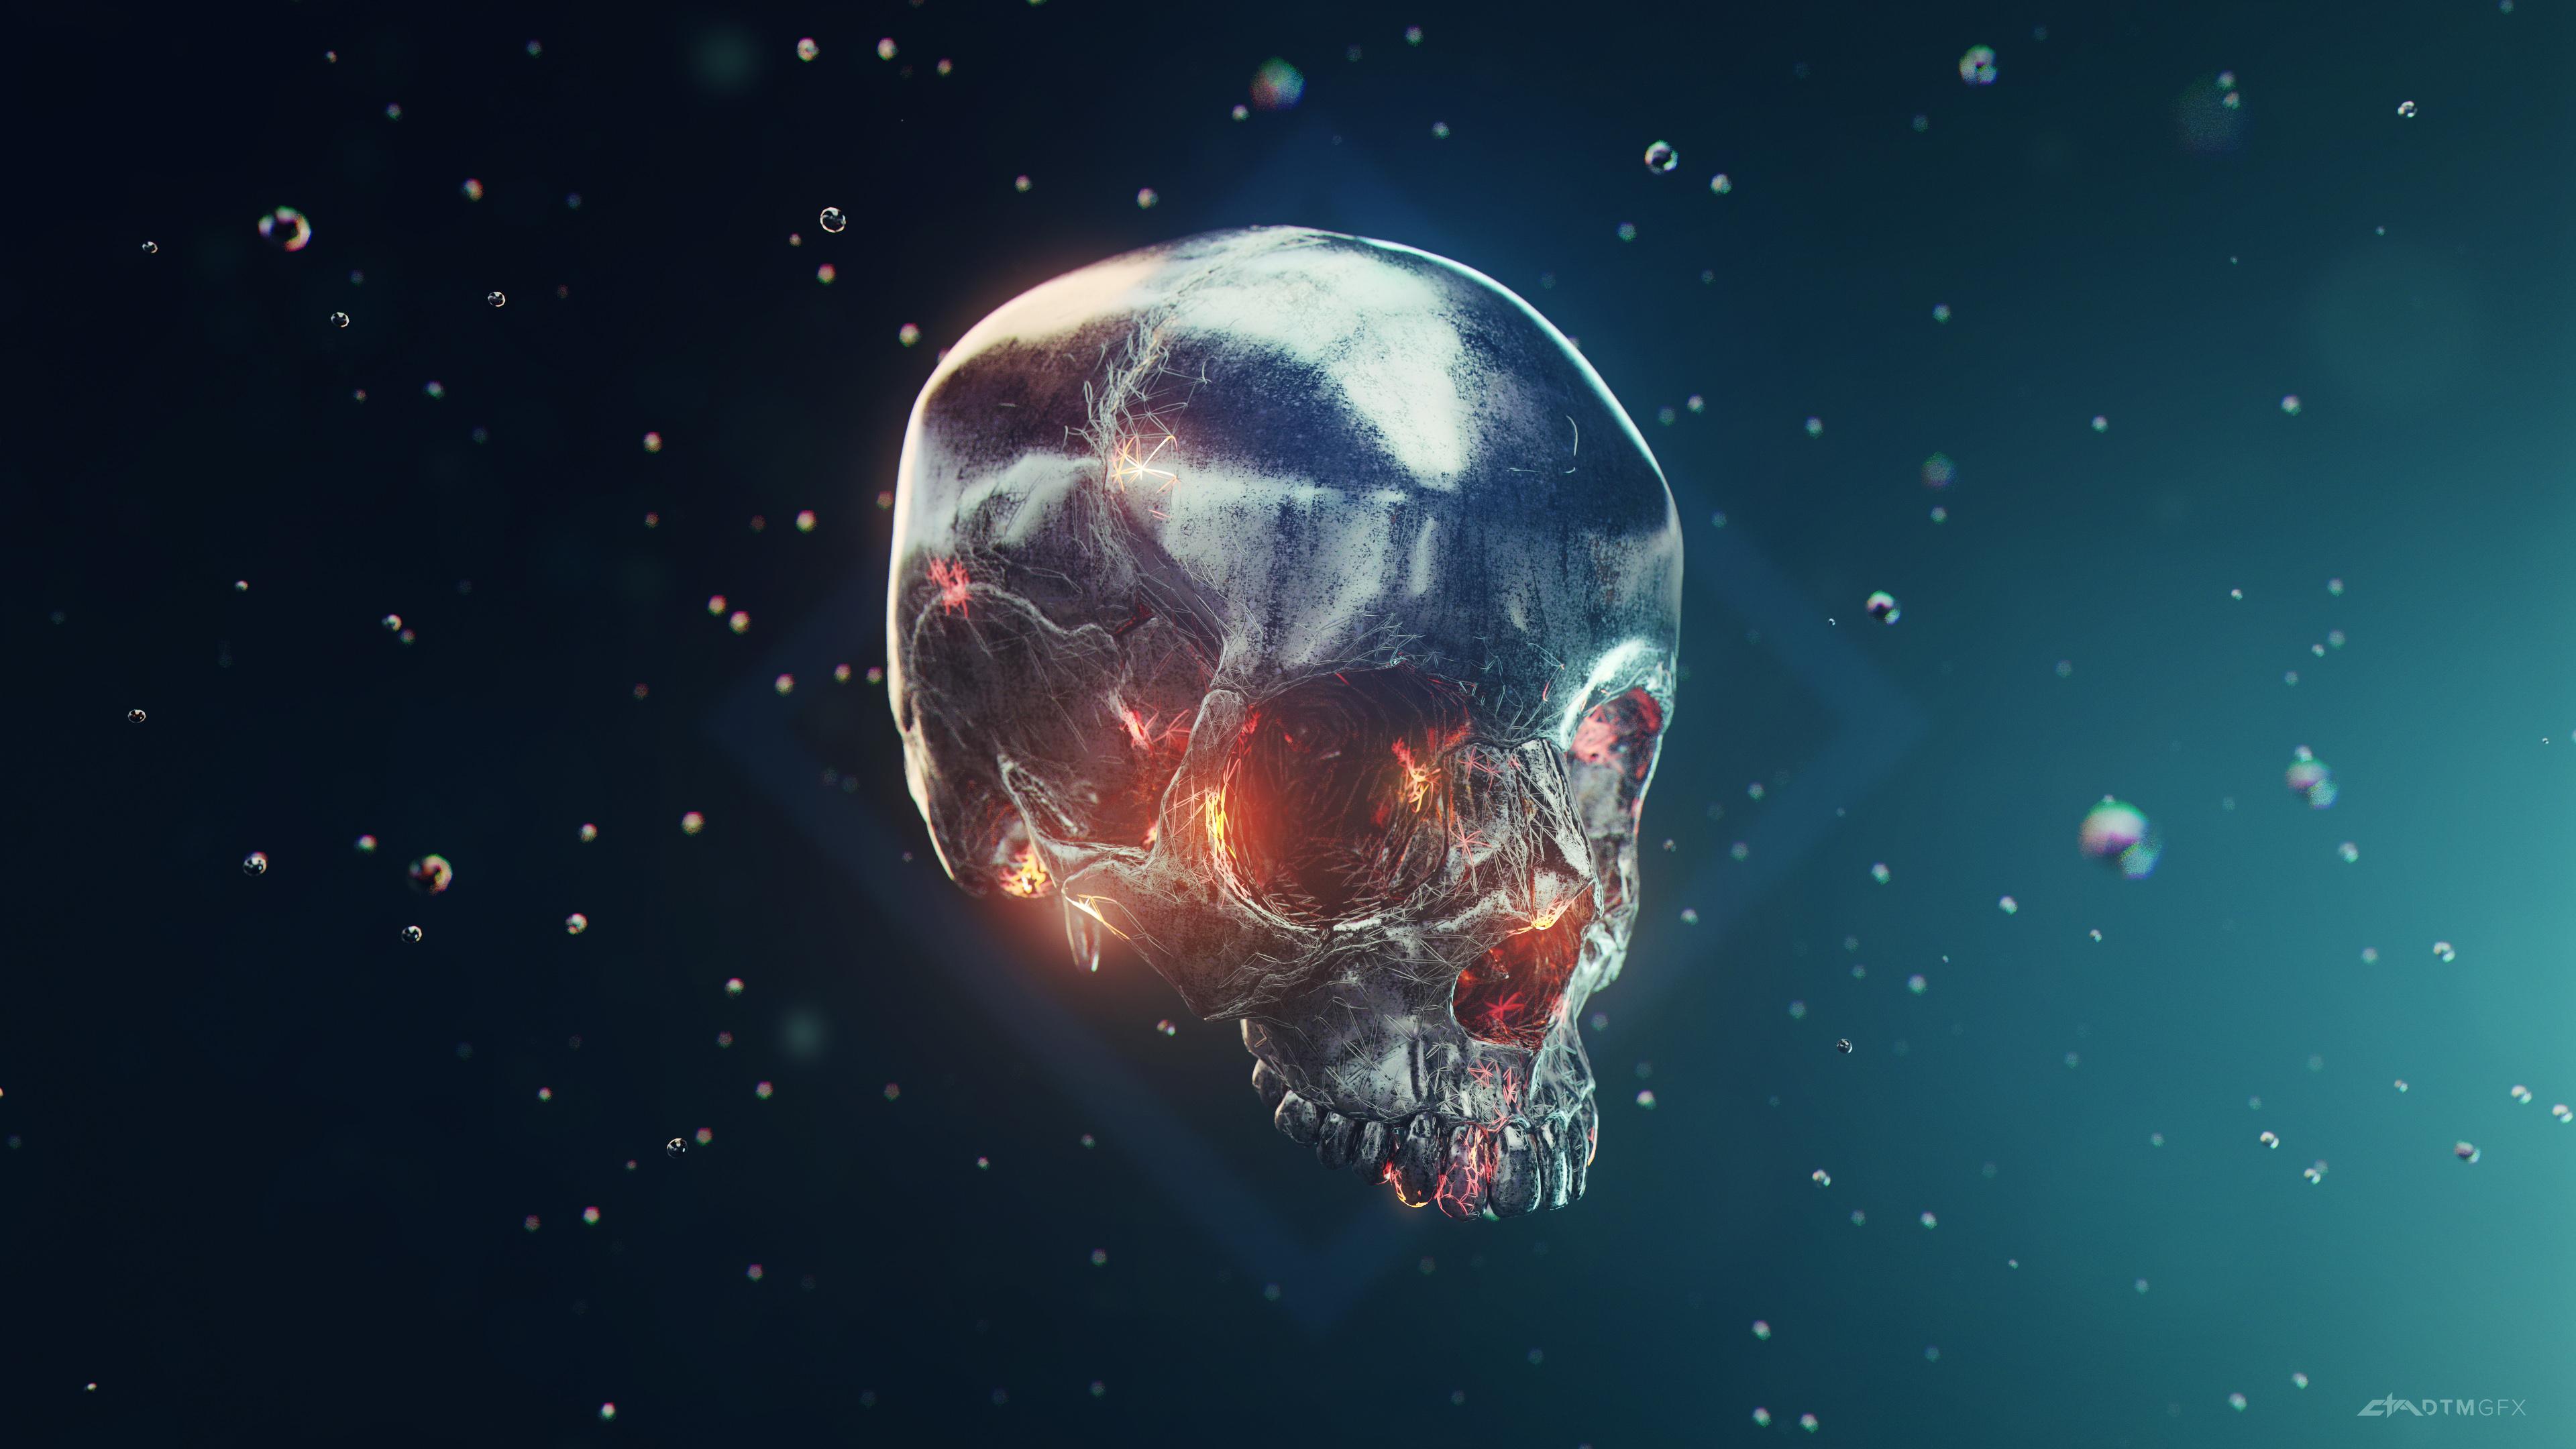 Skull 4K wallpaper for your desktop or mobile screen free and easy to download